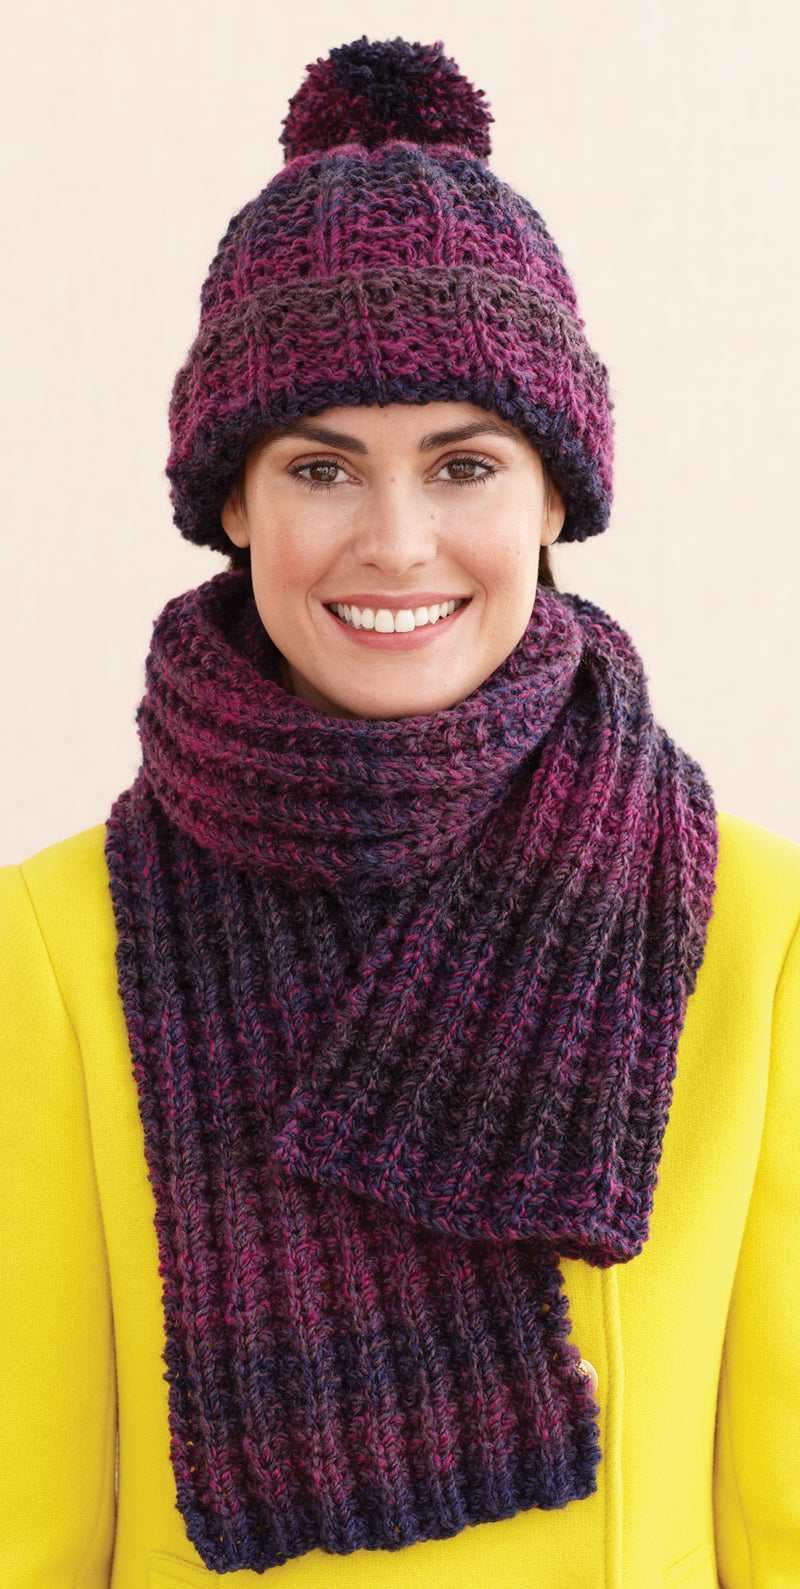 Rustic Ribbed Hat and Scarf Pattern (Knit) - Version 6